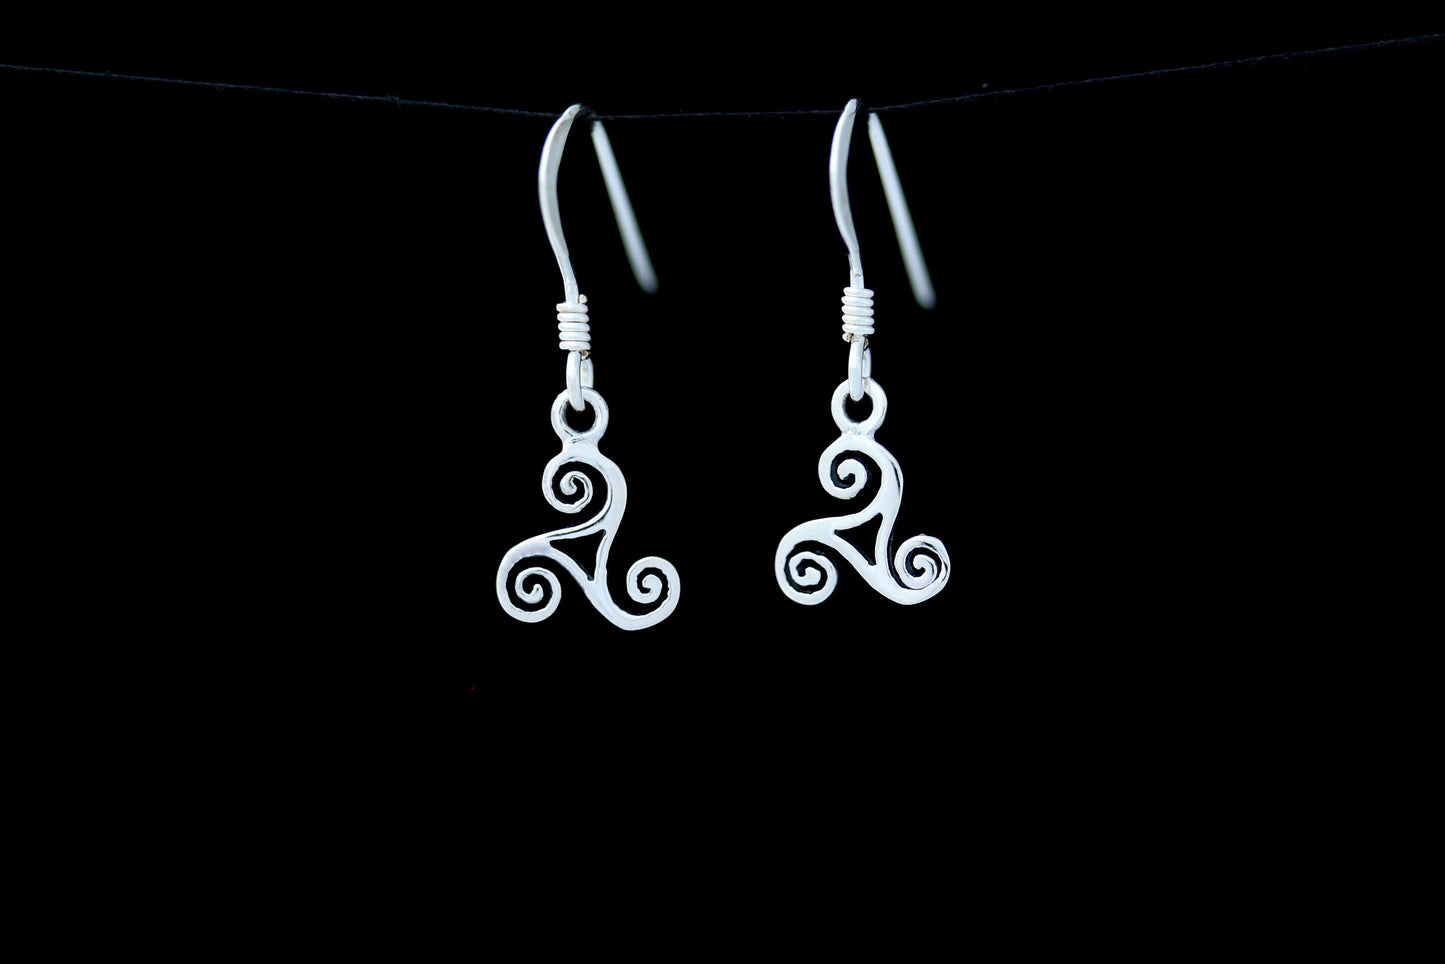 Triskele Earrings - Swirly Arms with Window (Small)